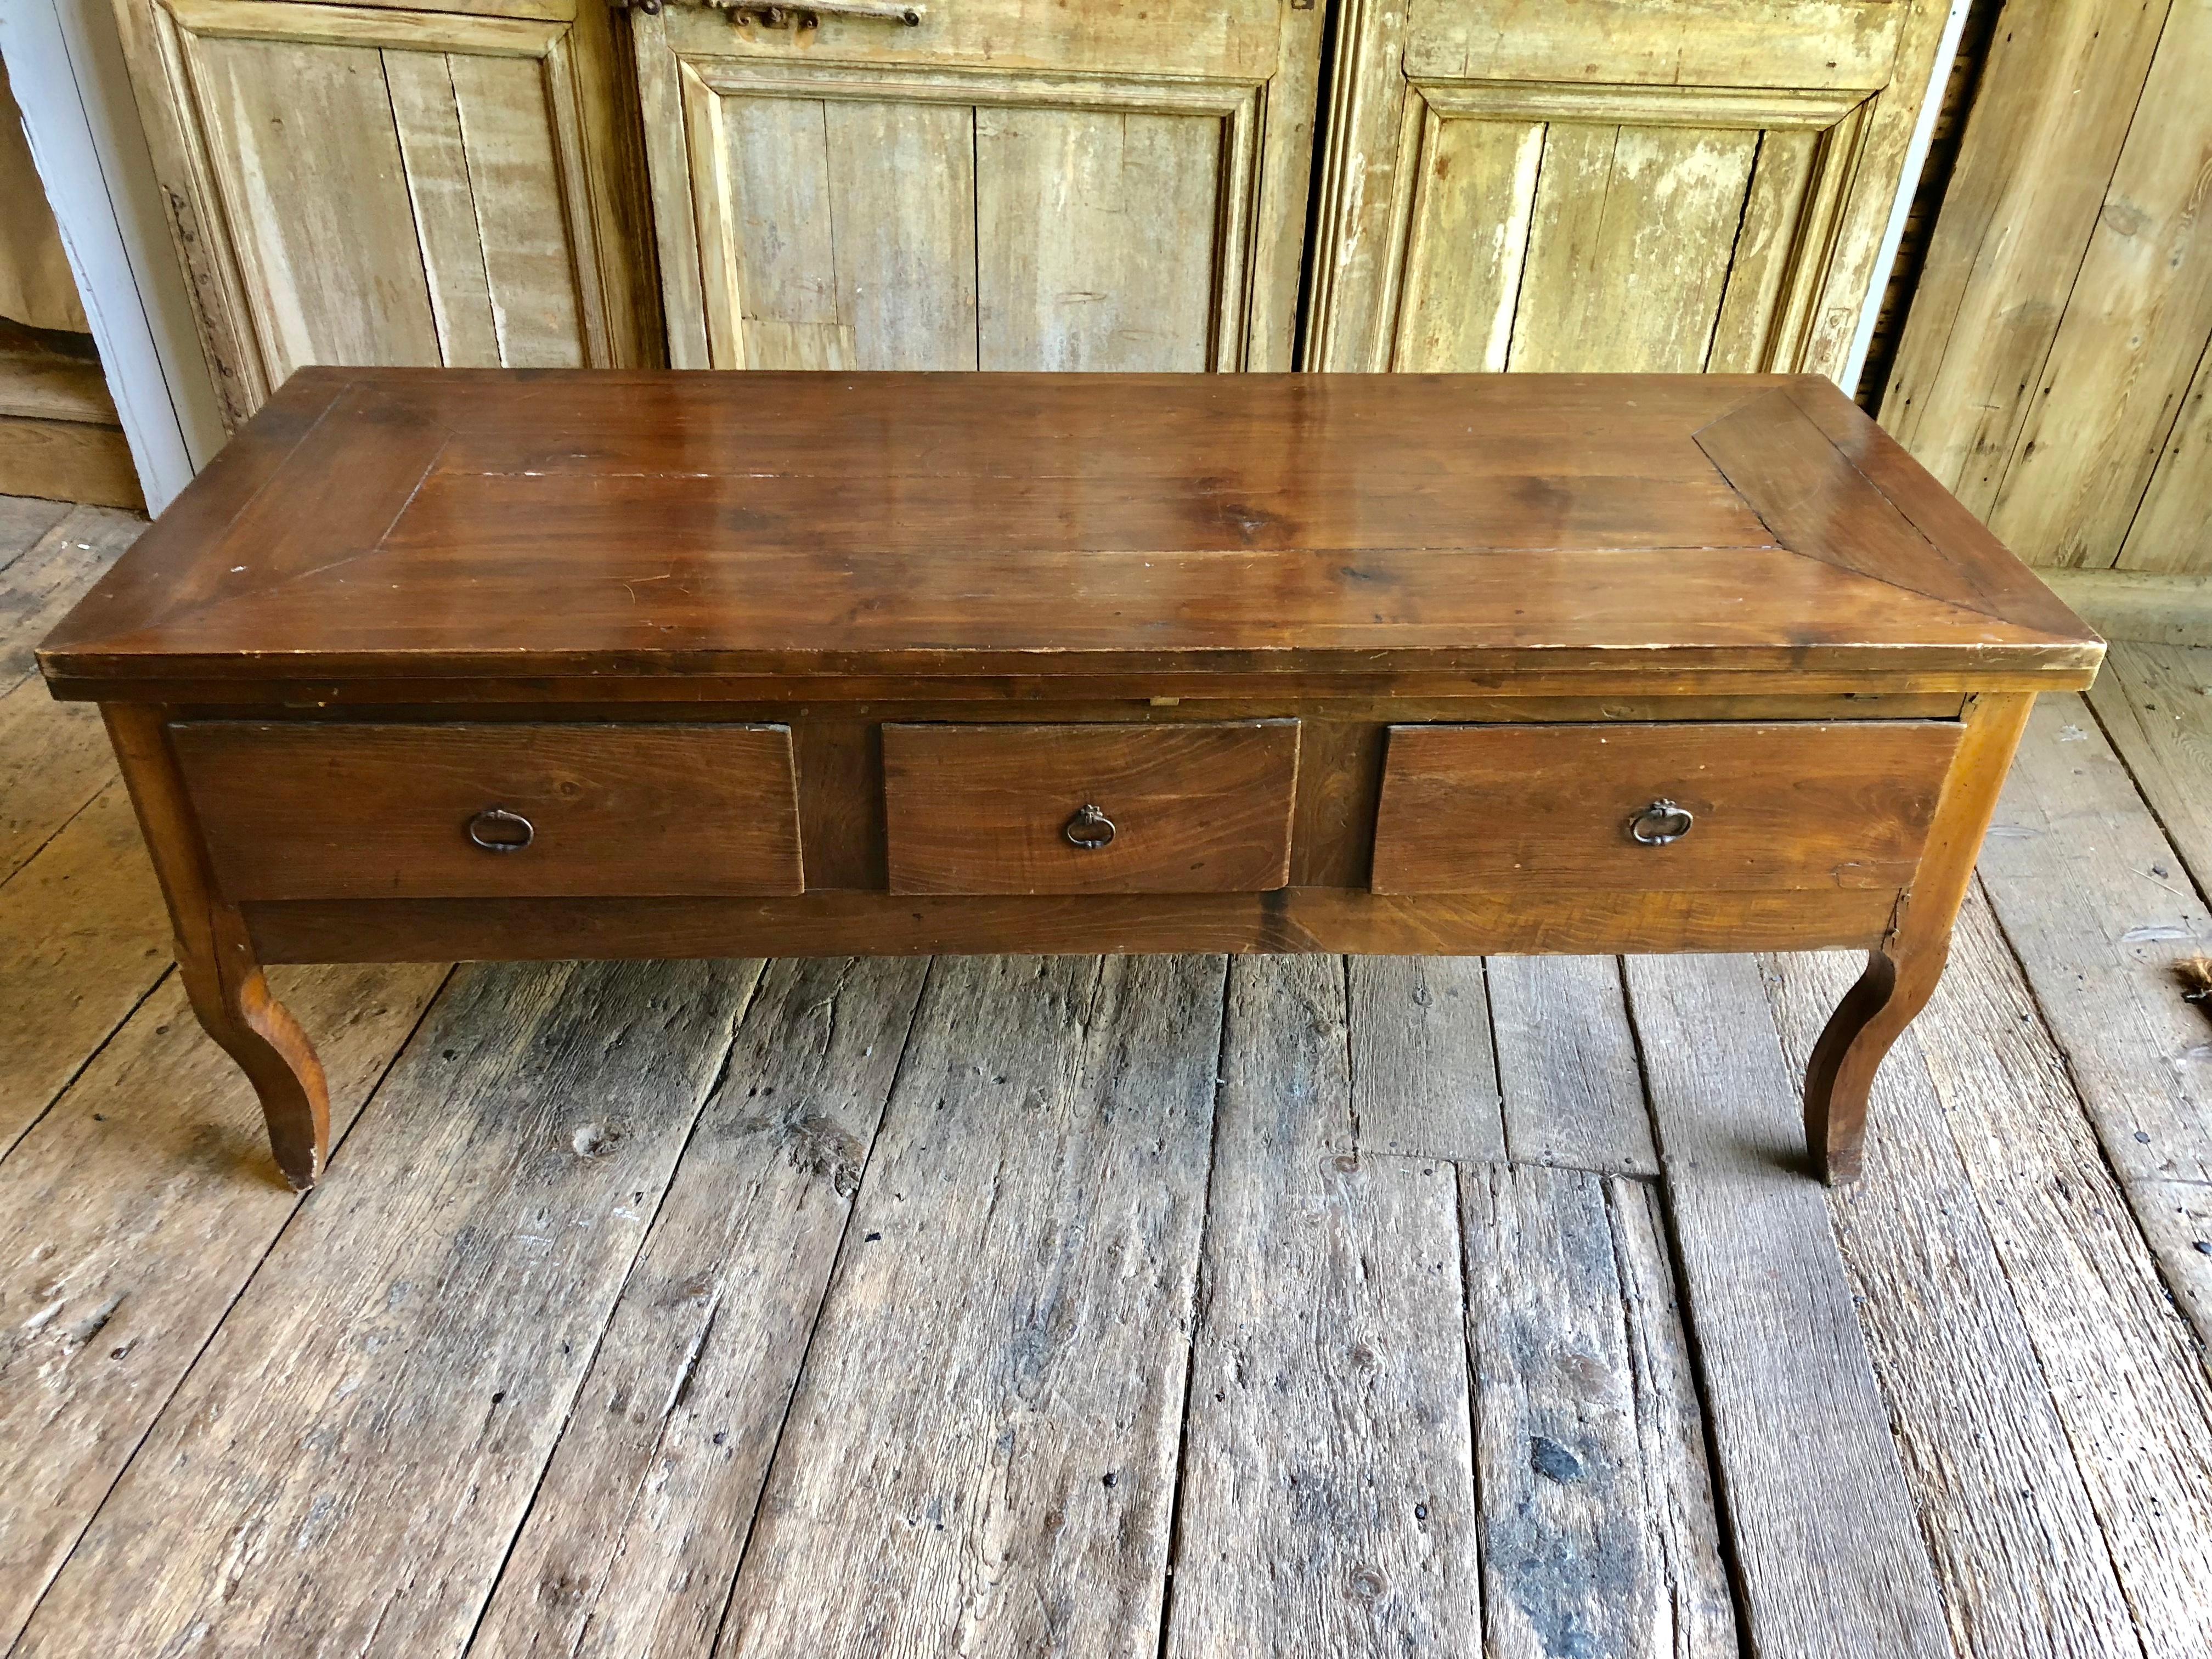 A mid-18th century French table with three large drawers on cabriole legs, having been converted to a dining table with ingenious pull-out leaf extensions on the sides. Cherrywood and oak.